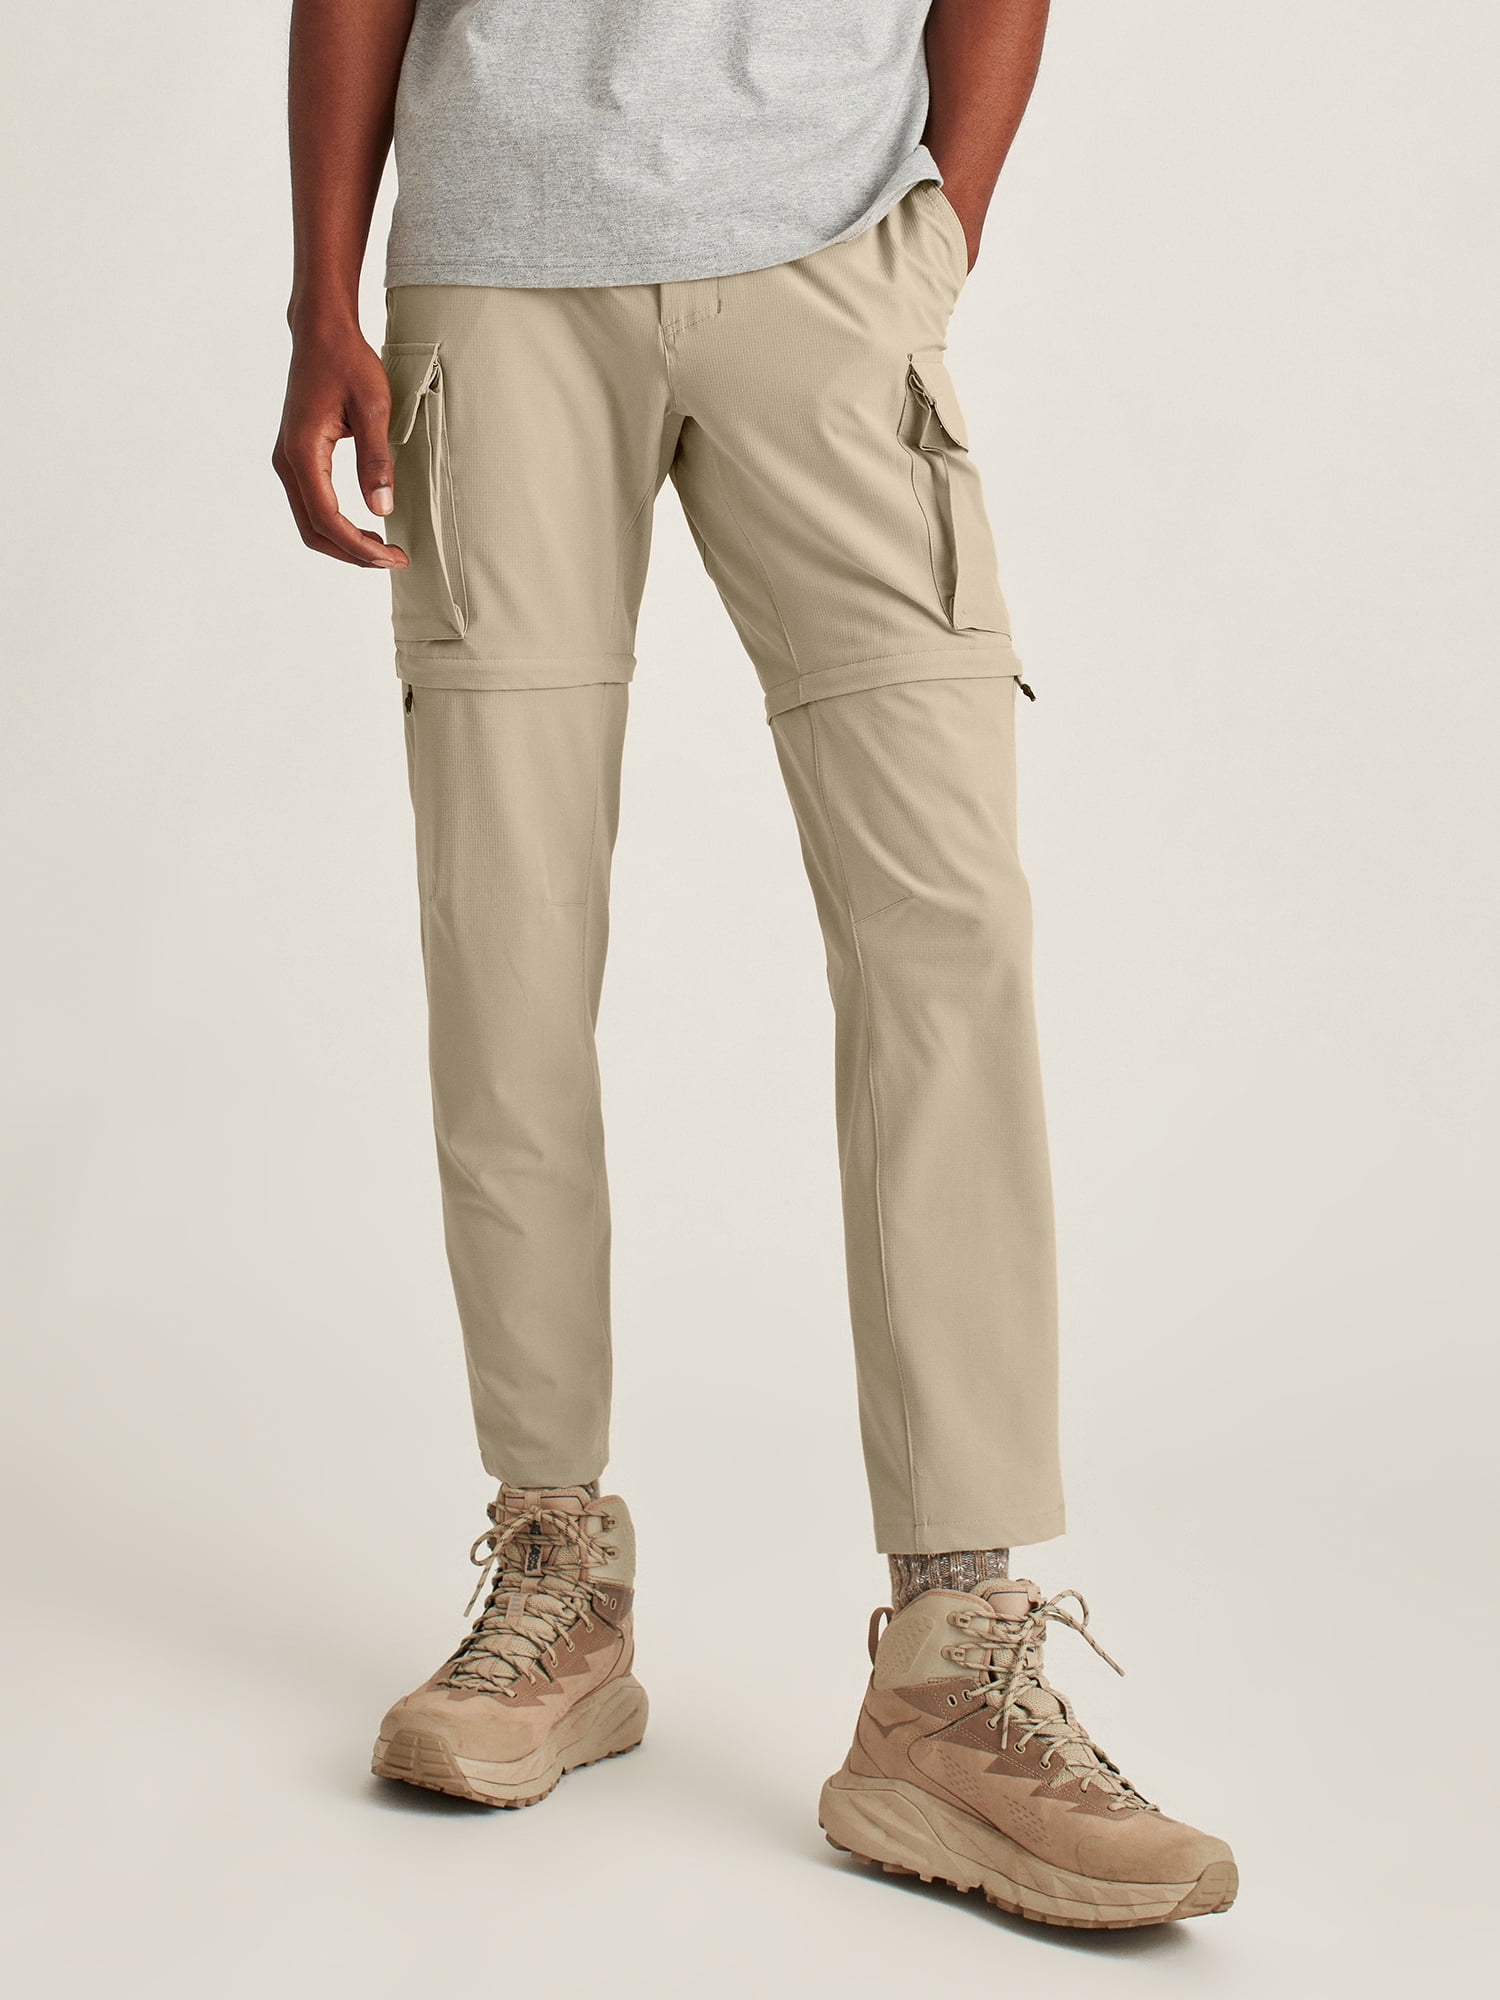 Bonobos Fielder Men's and Big Men's Stretch Convertible Cargo Pant, up to  3XL 